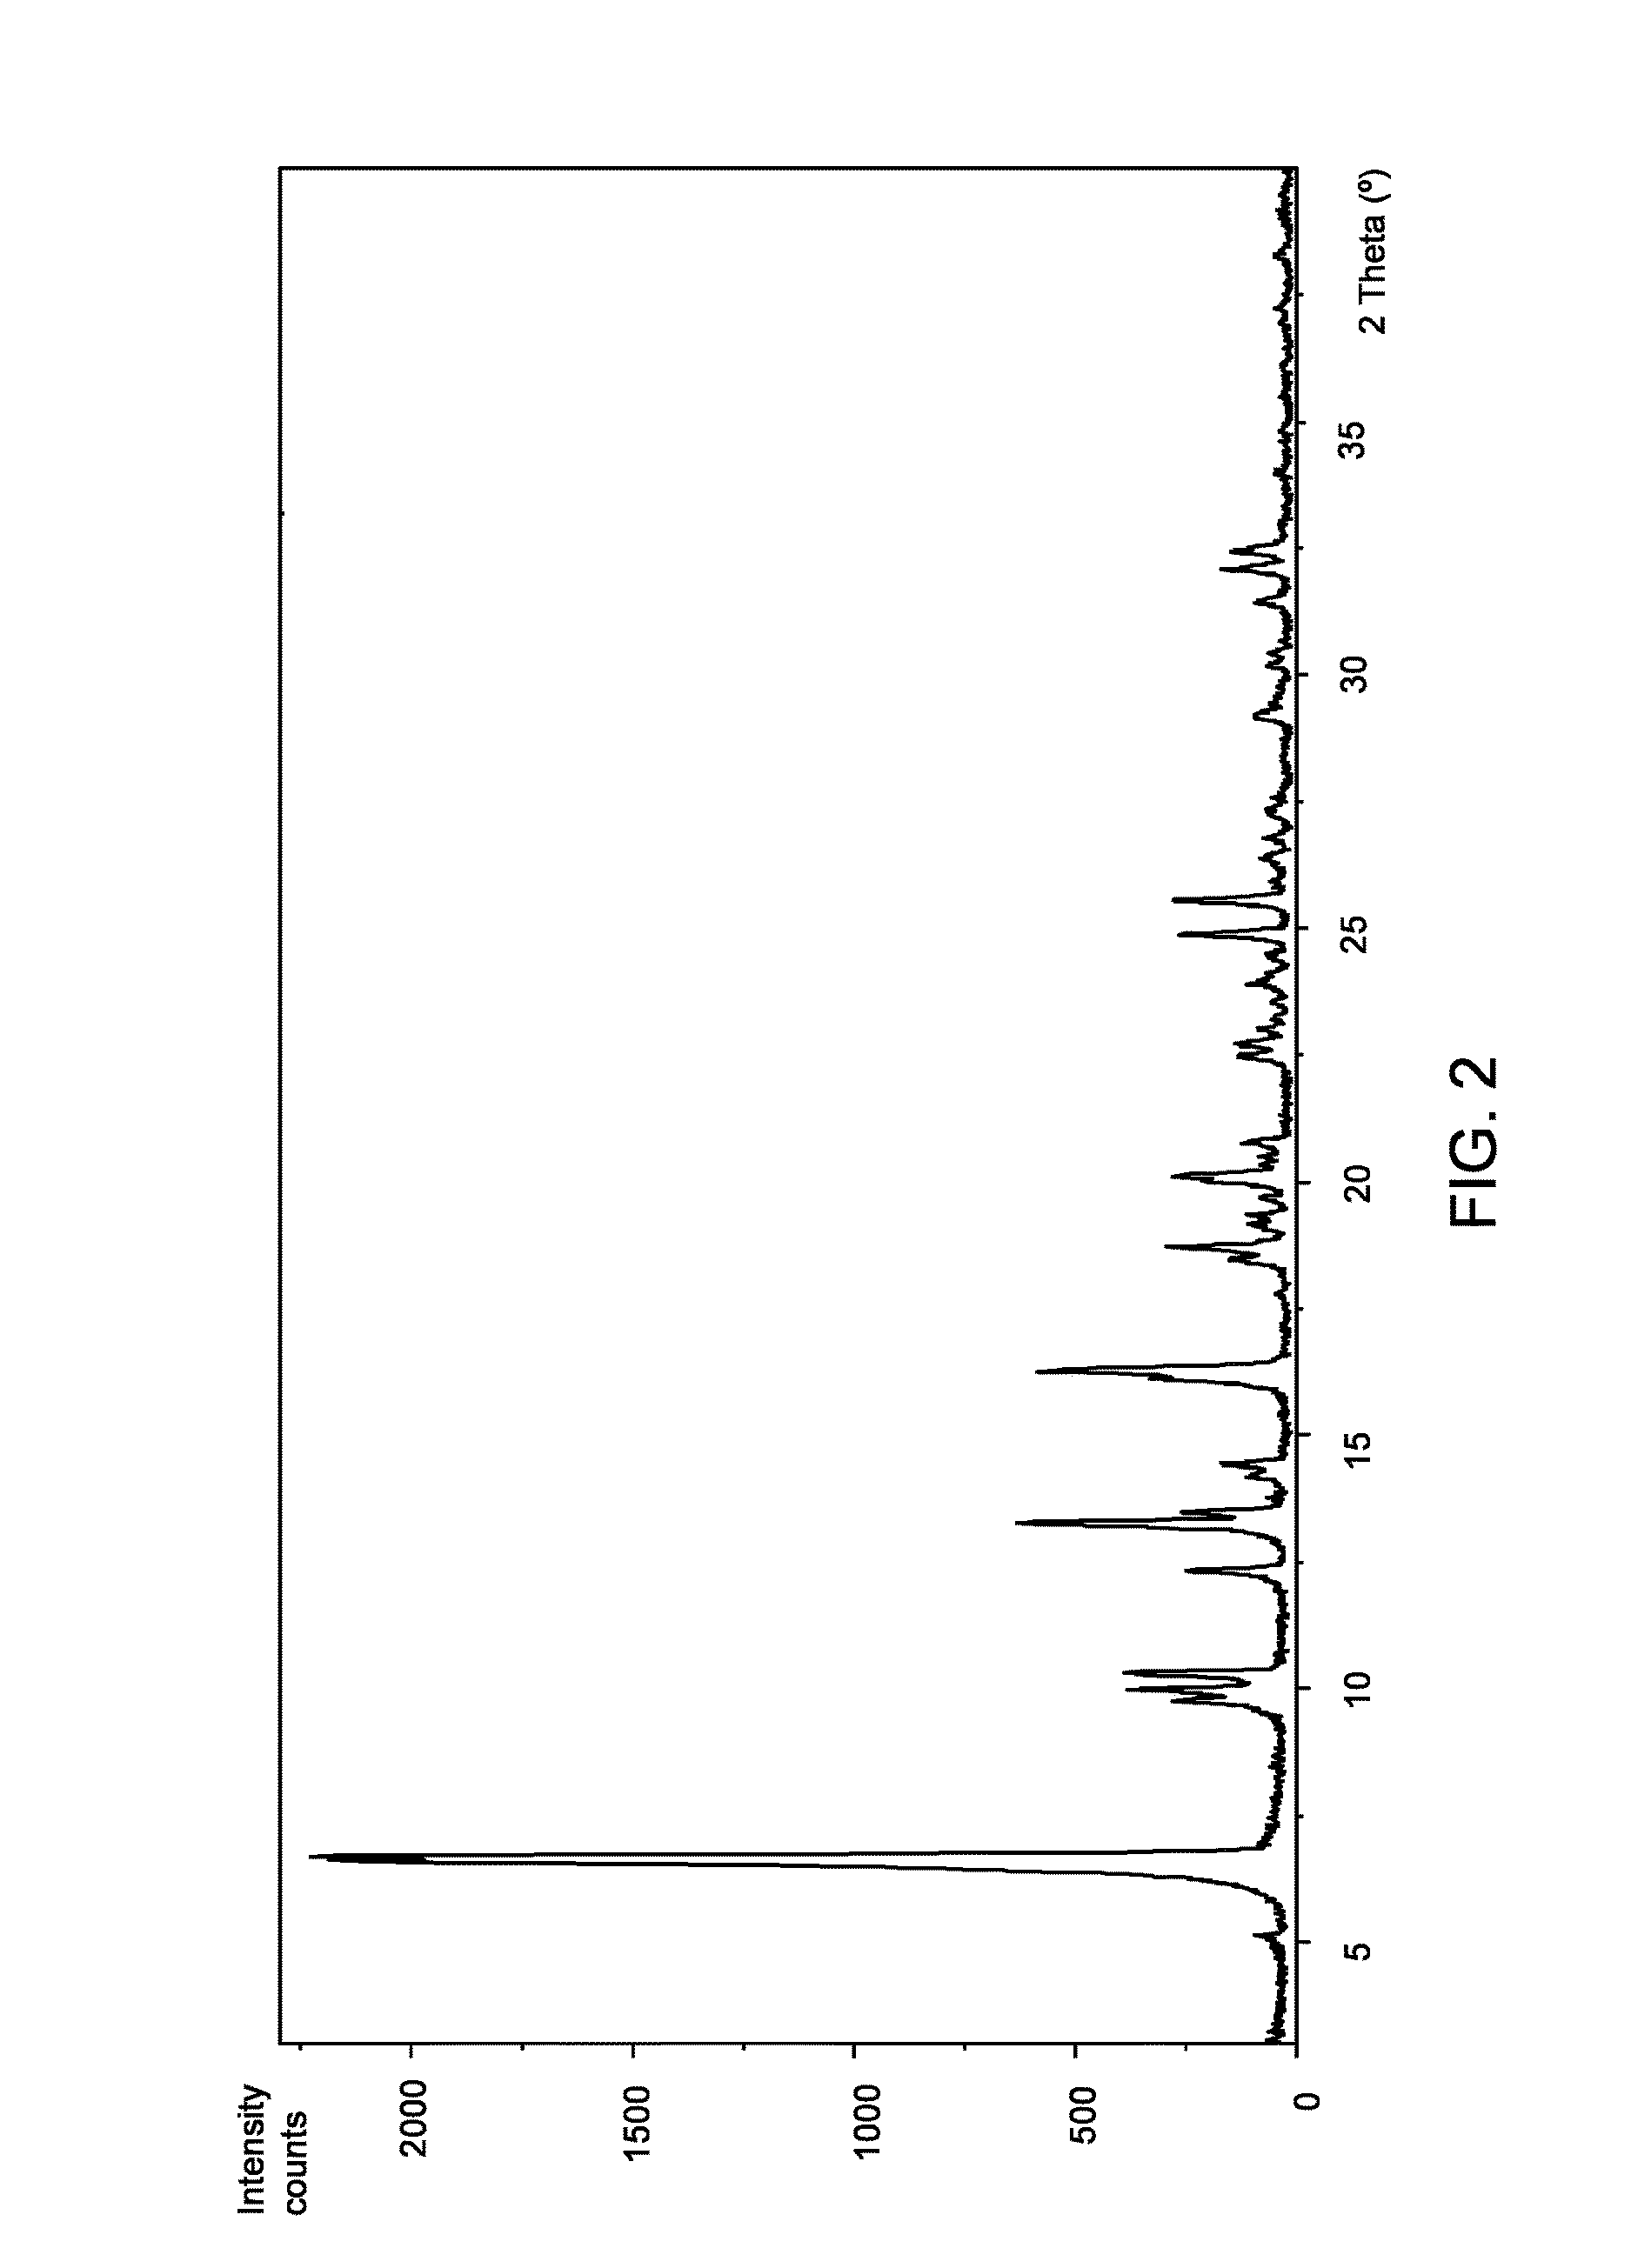 Preparation process of carboxylic acid derivatives and intermediates thereof